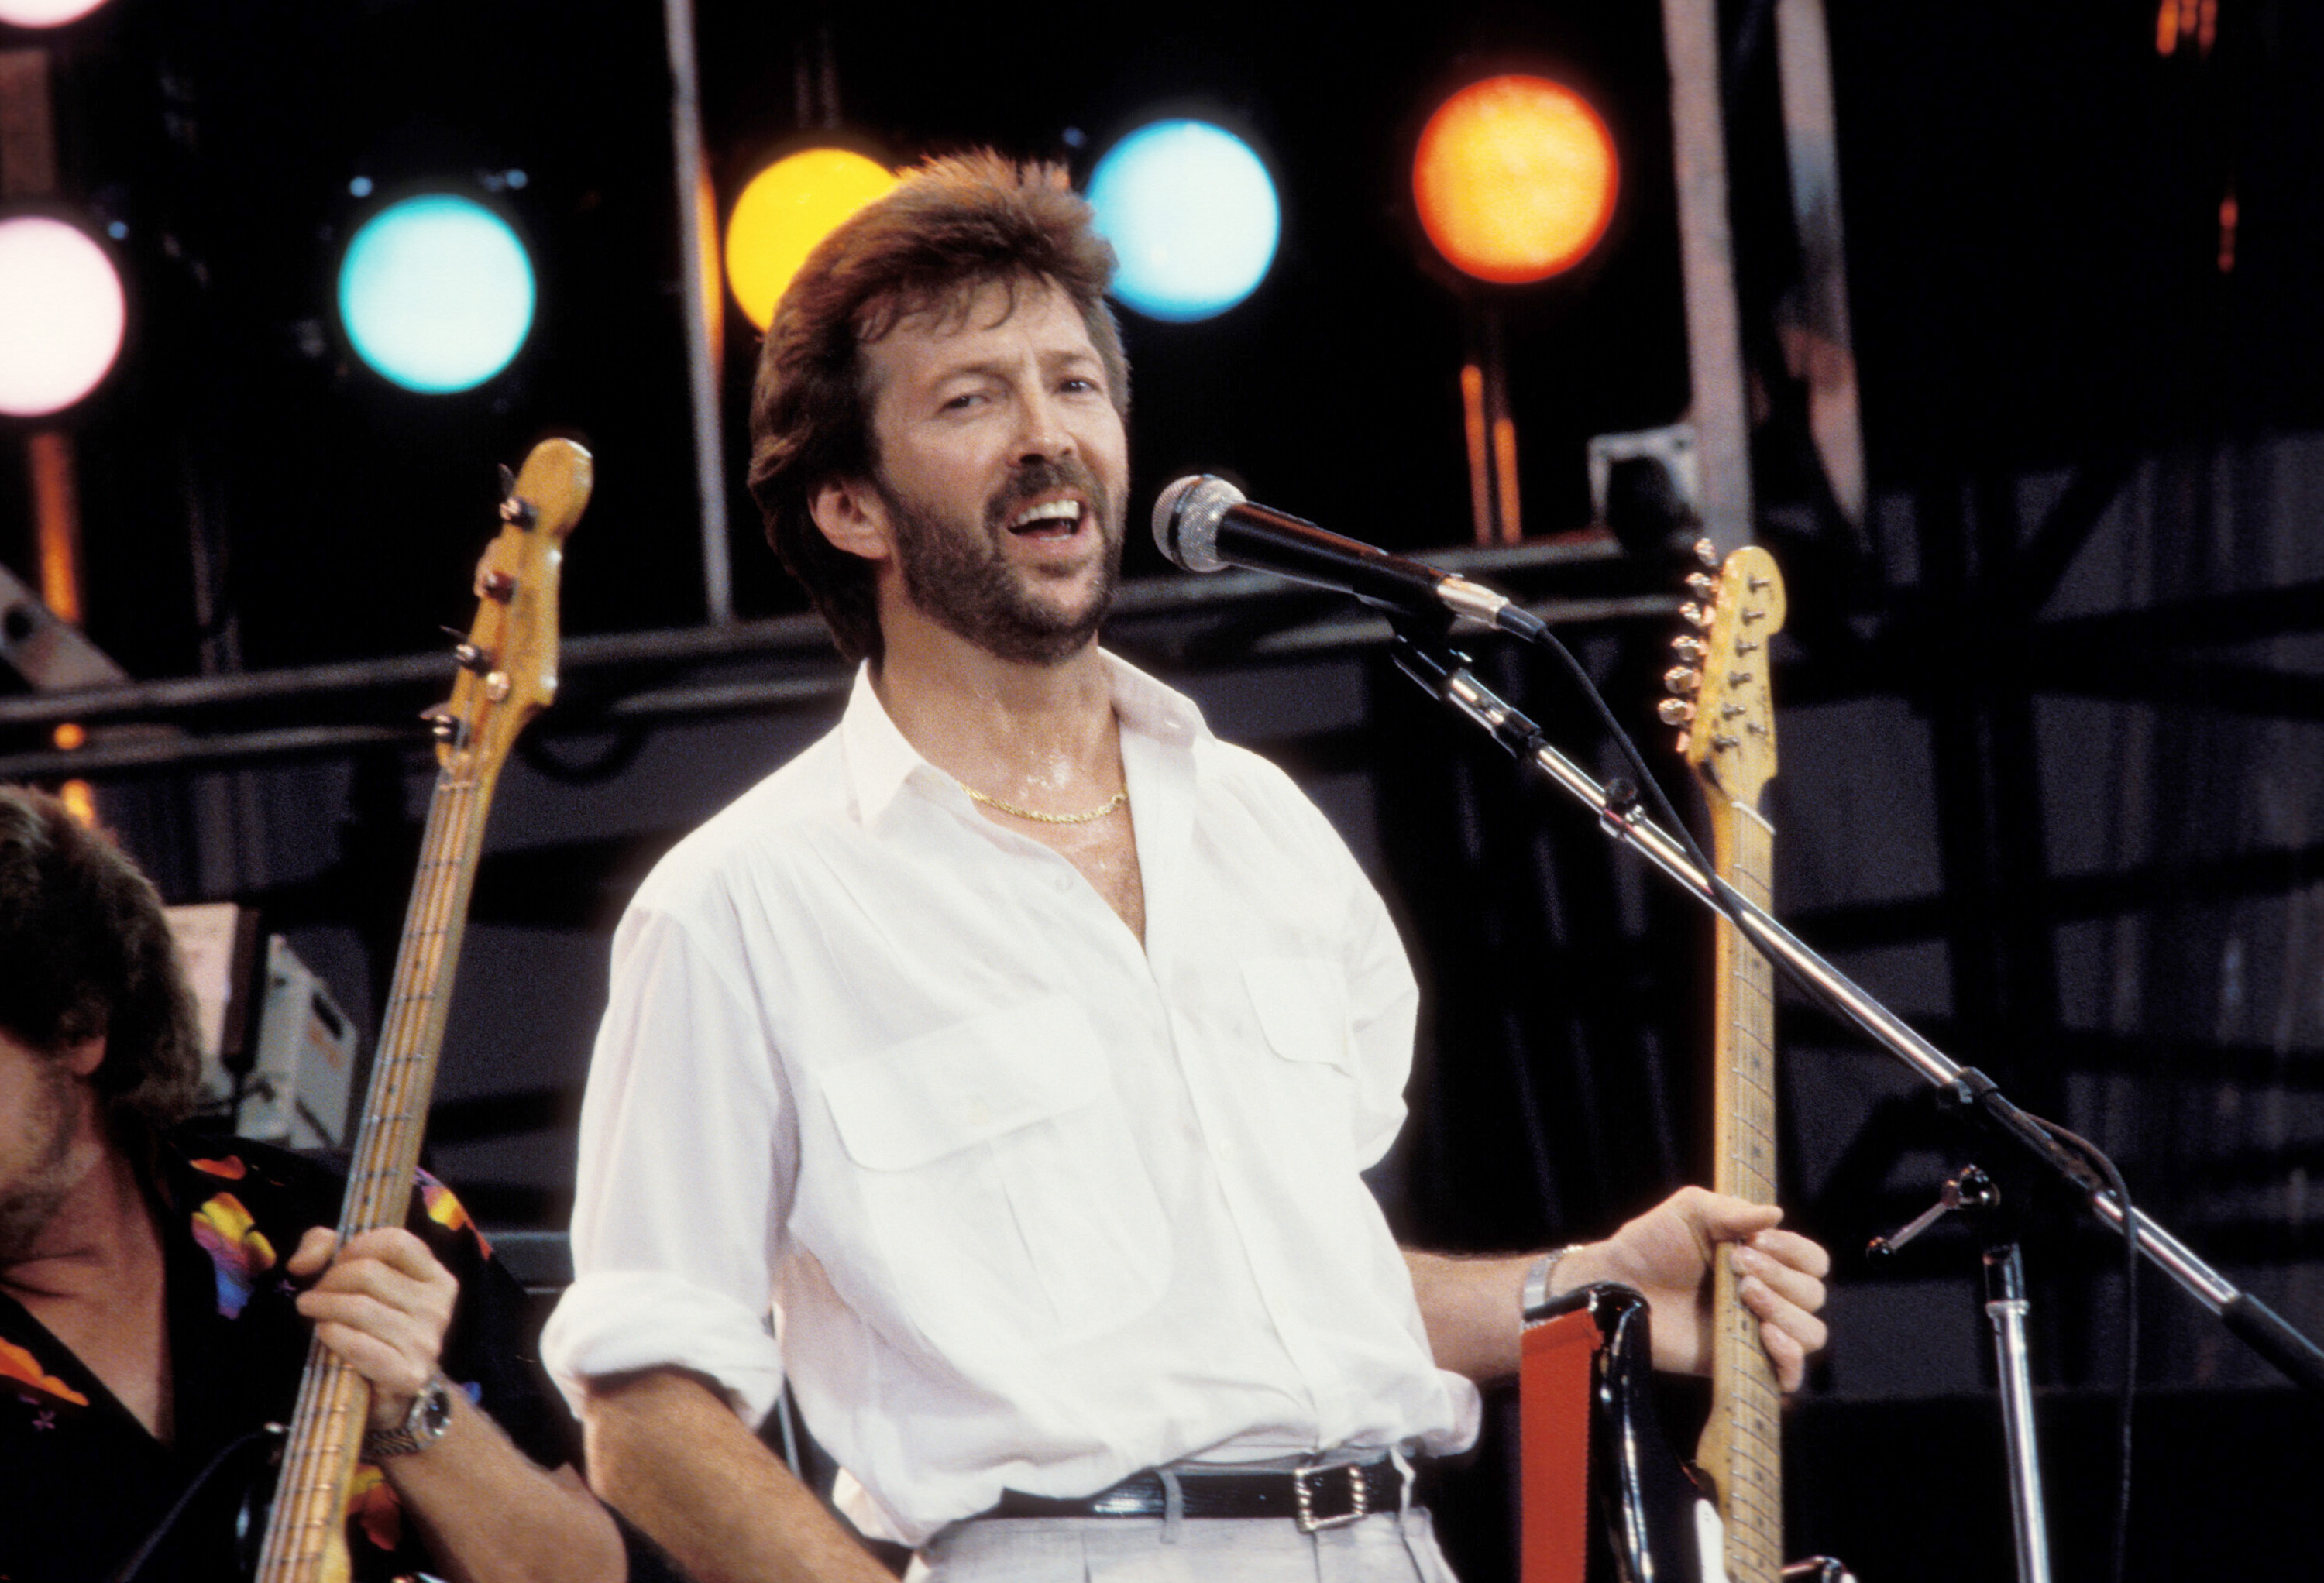 Eric Clapton's look was pretty hard to mess with. (Photo by KMazur/WireImage)